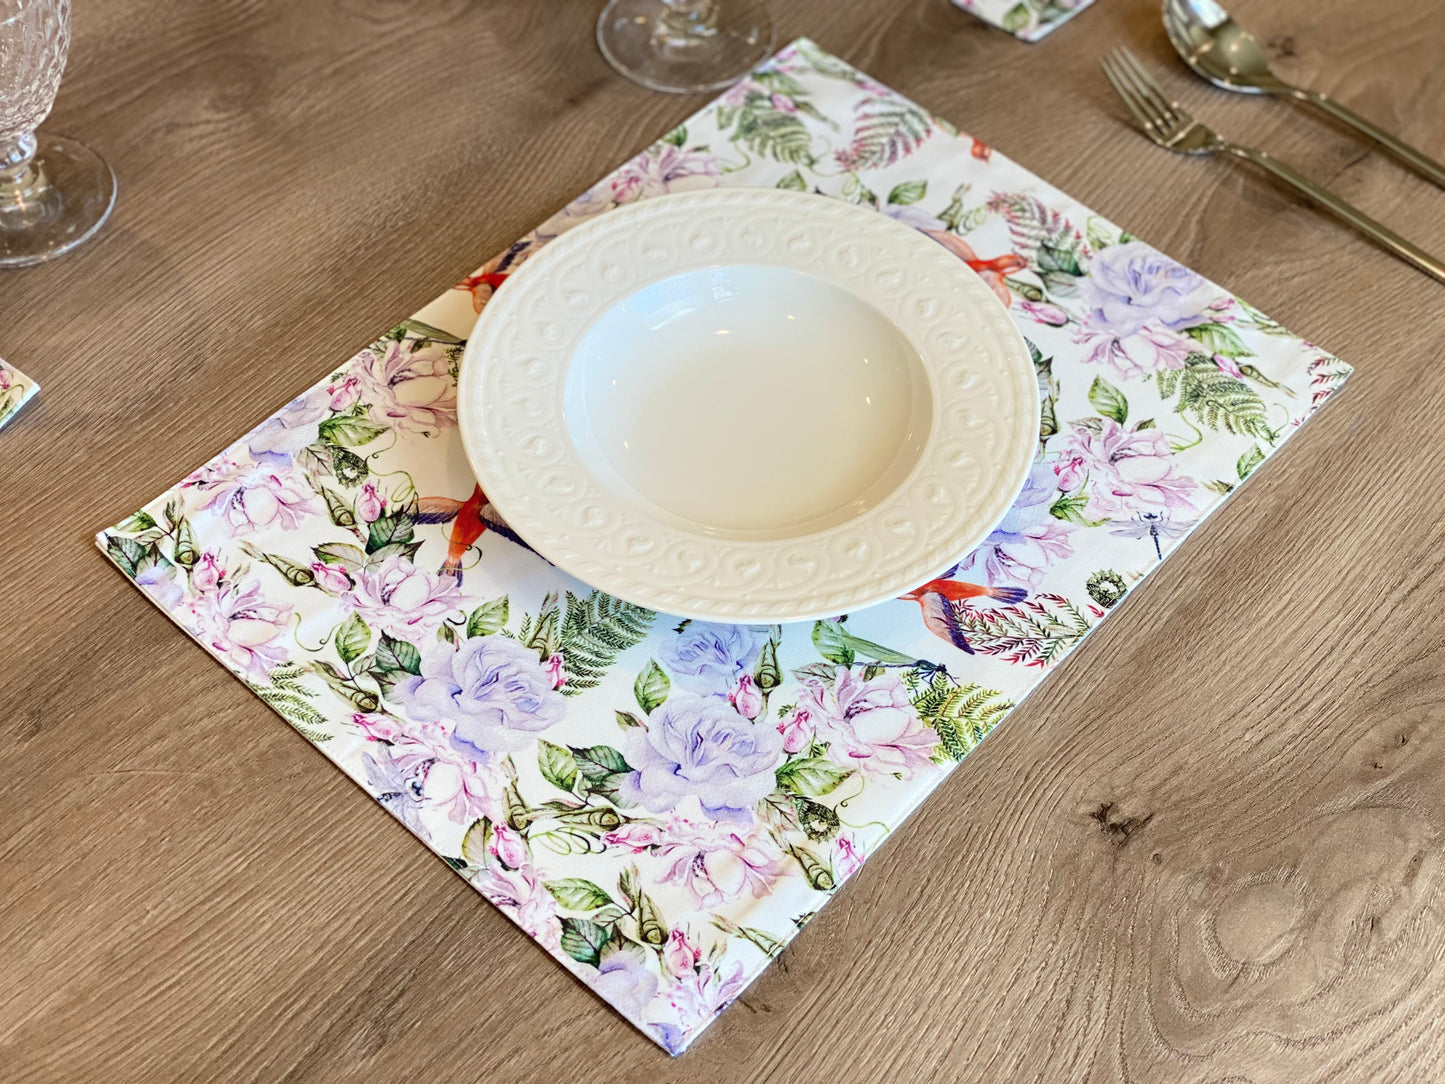 Set of 4 Floral and Bird Placemat, Beautiful Watercolor Pattern with roses flowers and birds, Machine washable Cotton Placemat